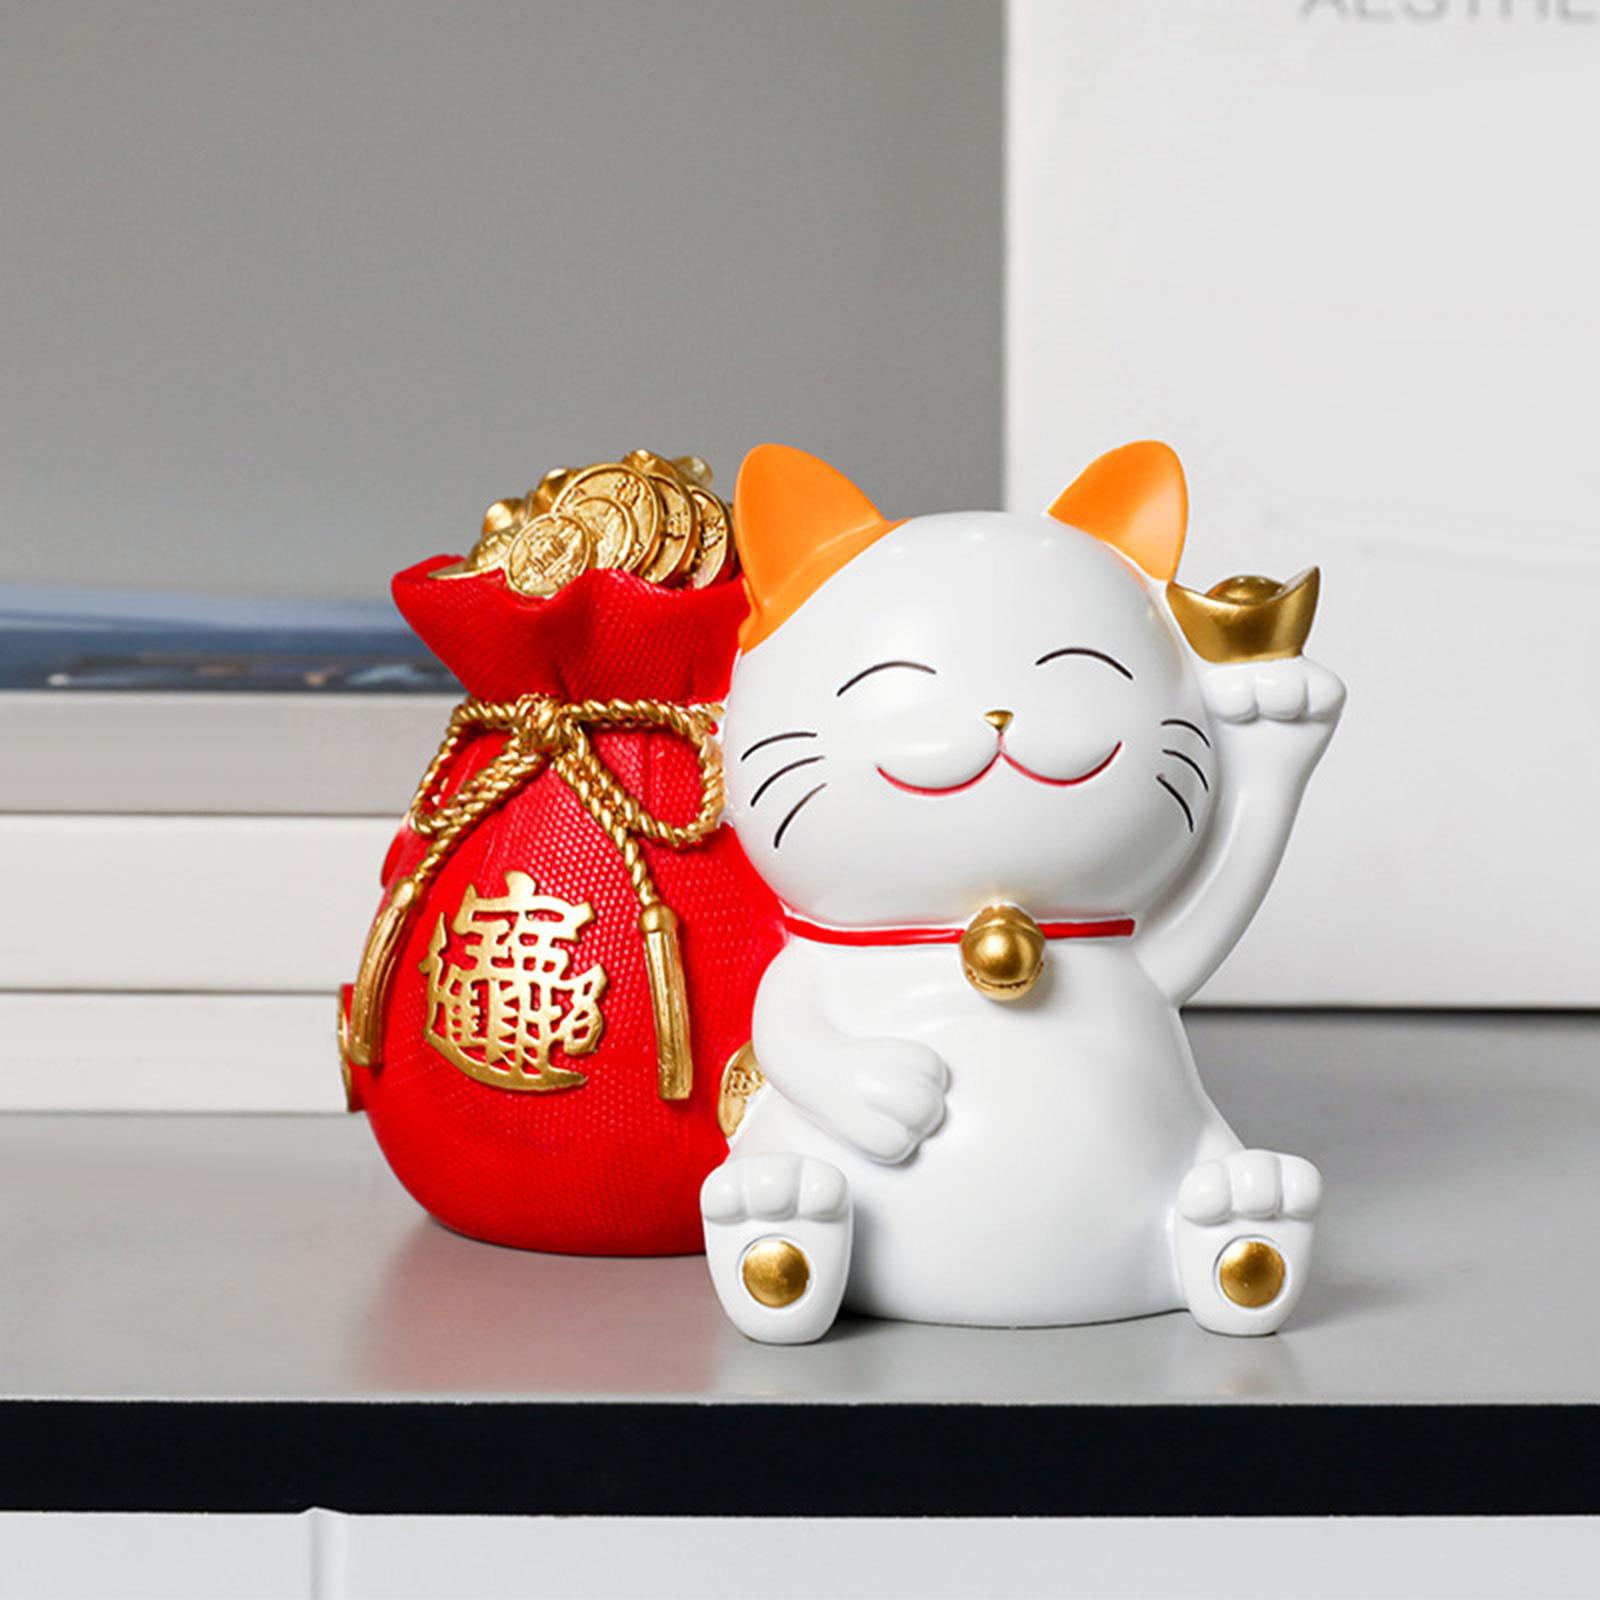 Animal Piggy Bank Lucky Cat Statue Small Money Bank for Children Adults Gift Red Bag